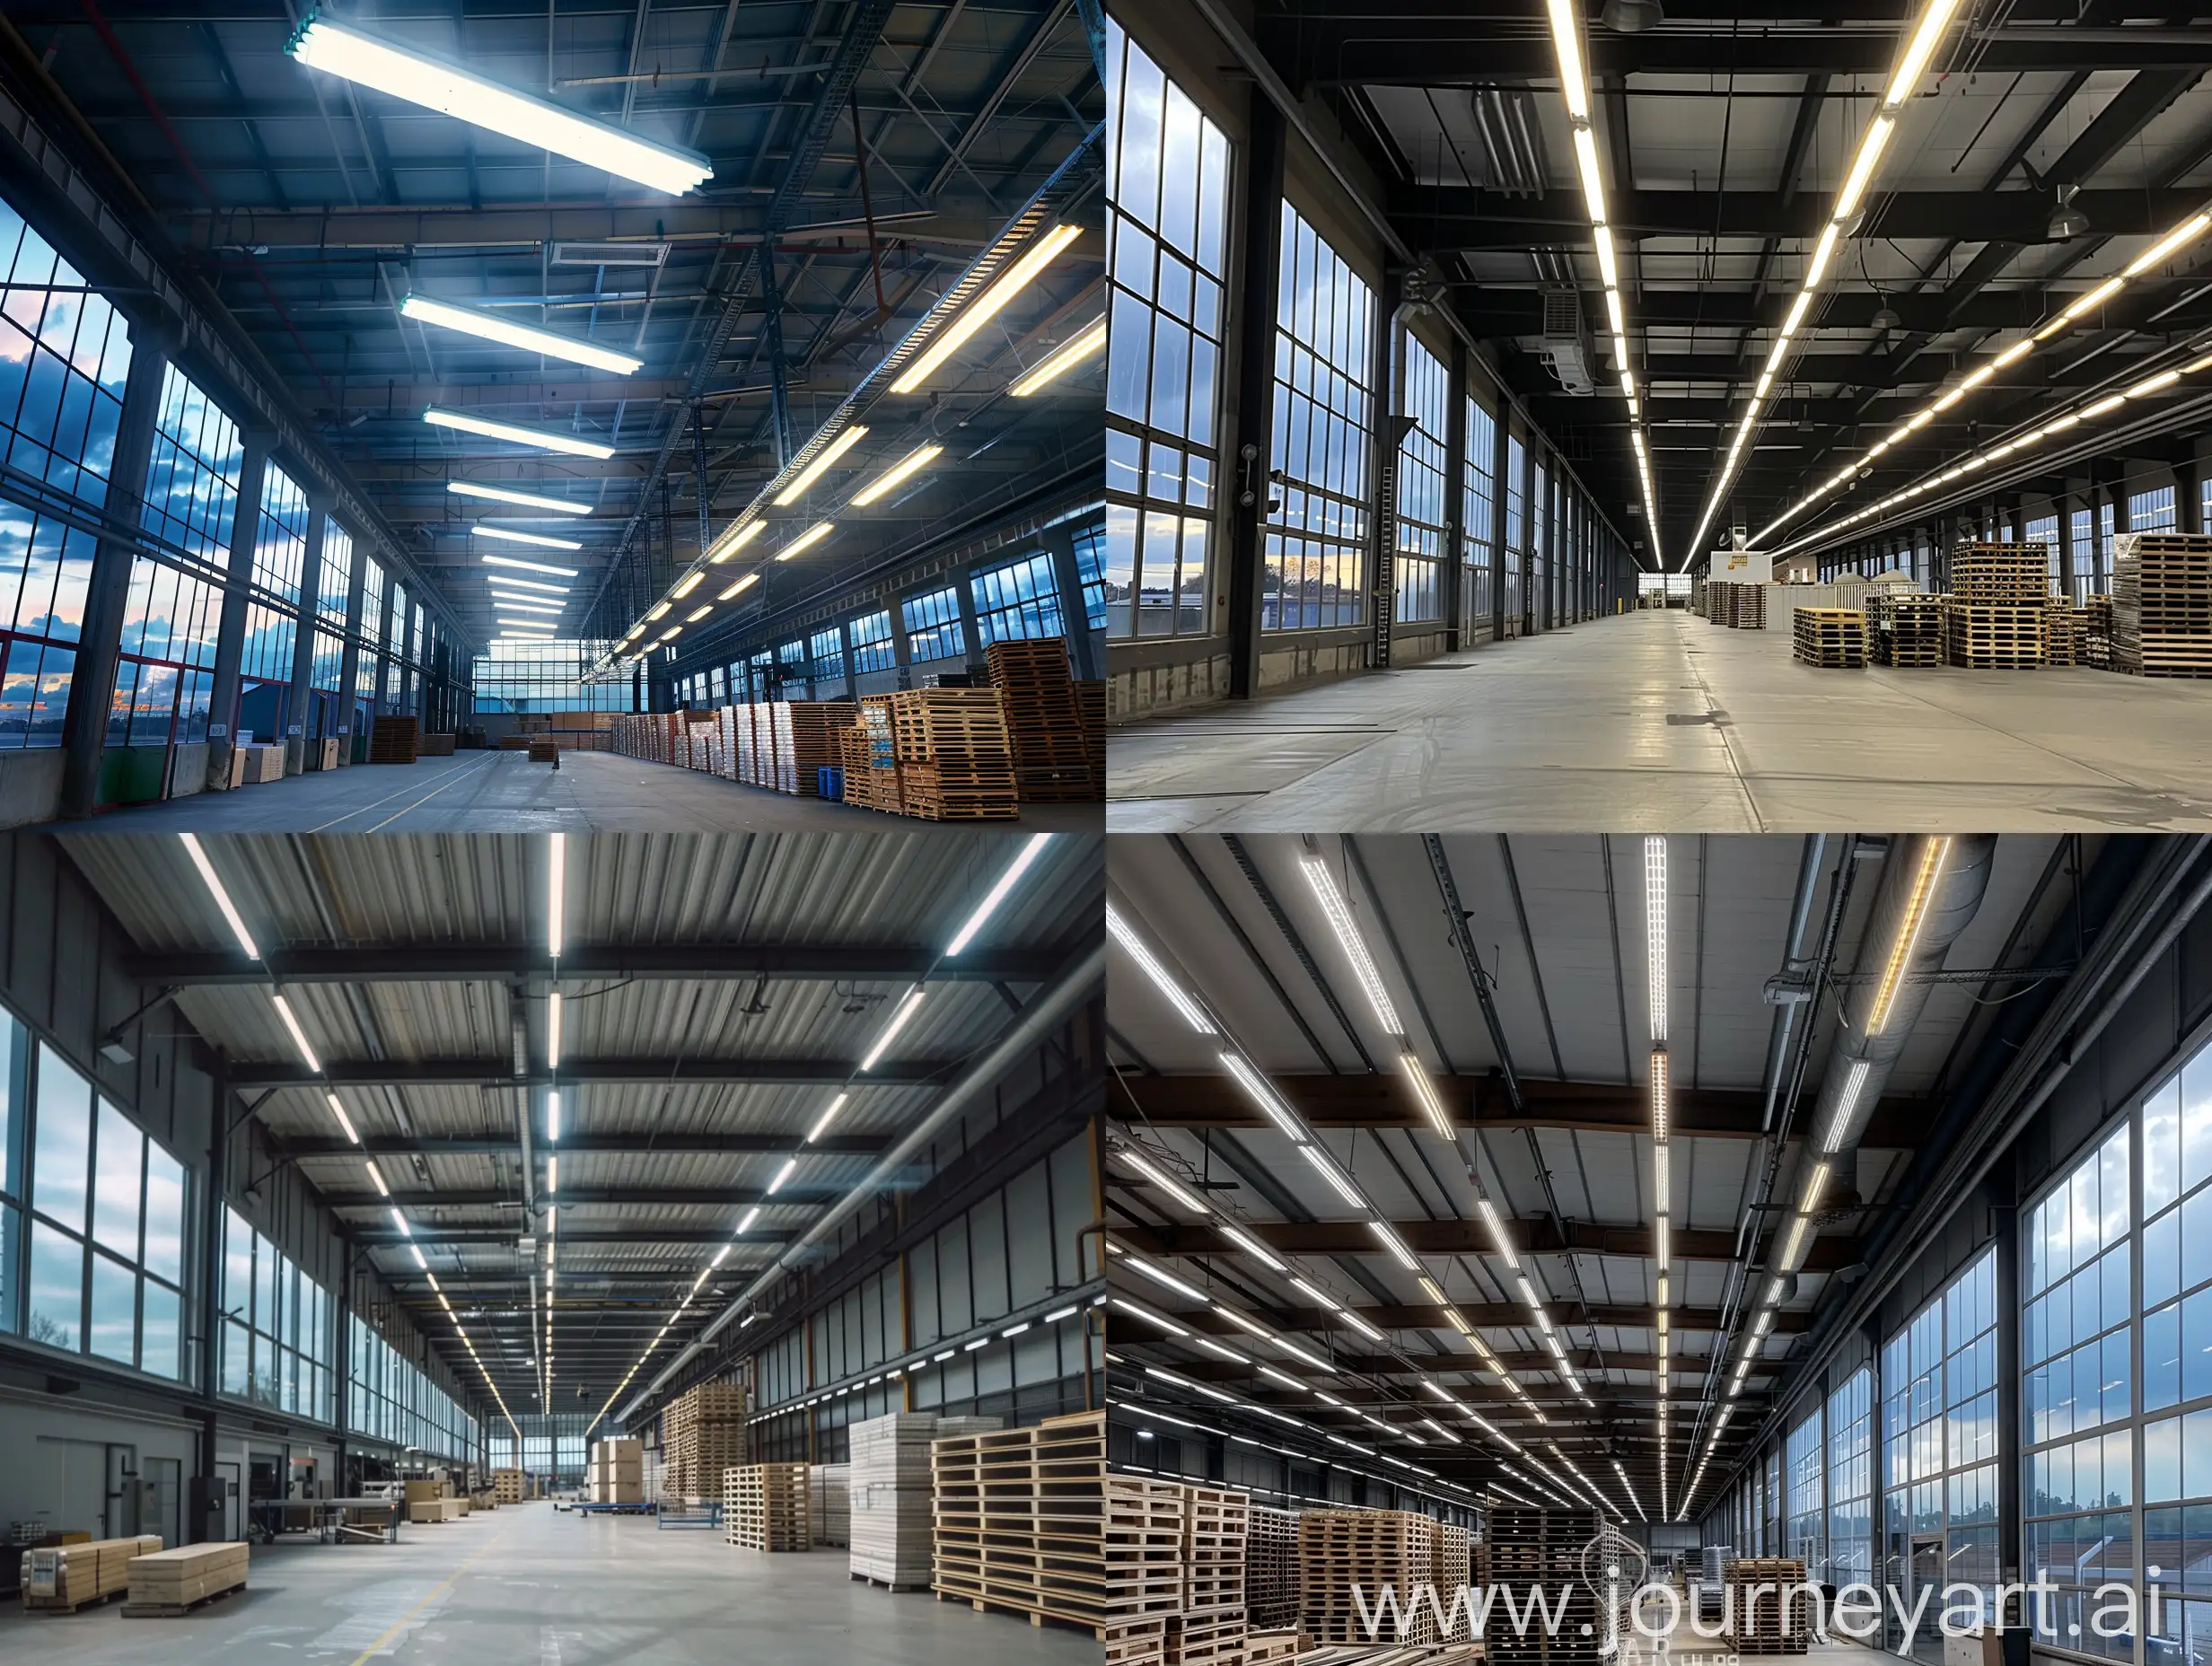 Industrial-Warehouse-with-Exposed-Steel-Beams-and-Wooden-Crates